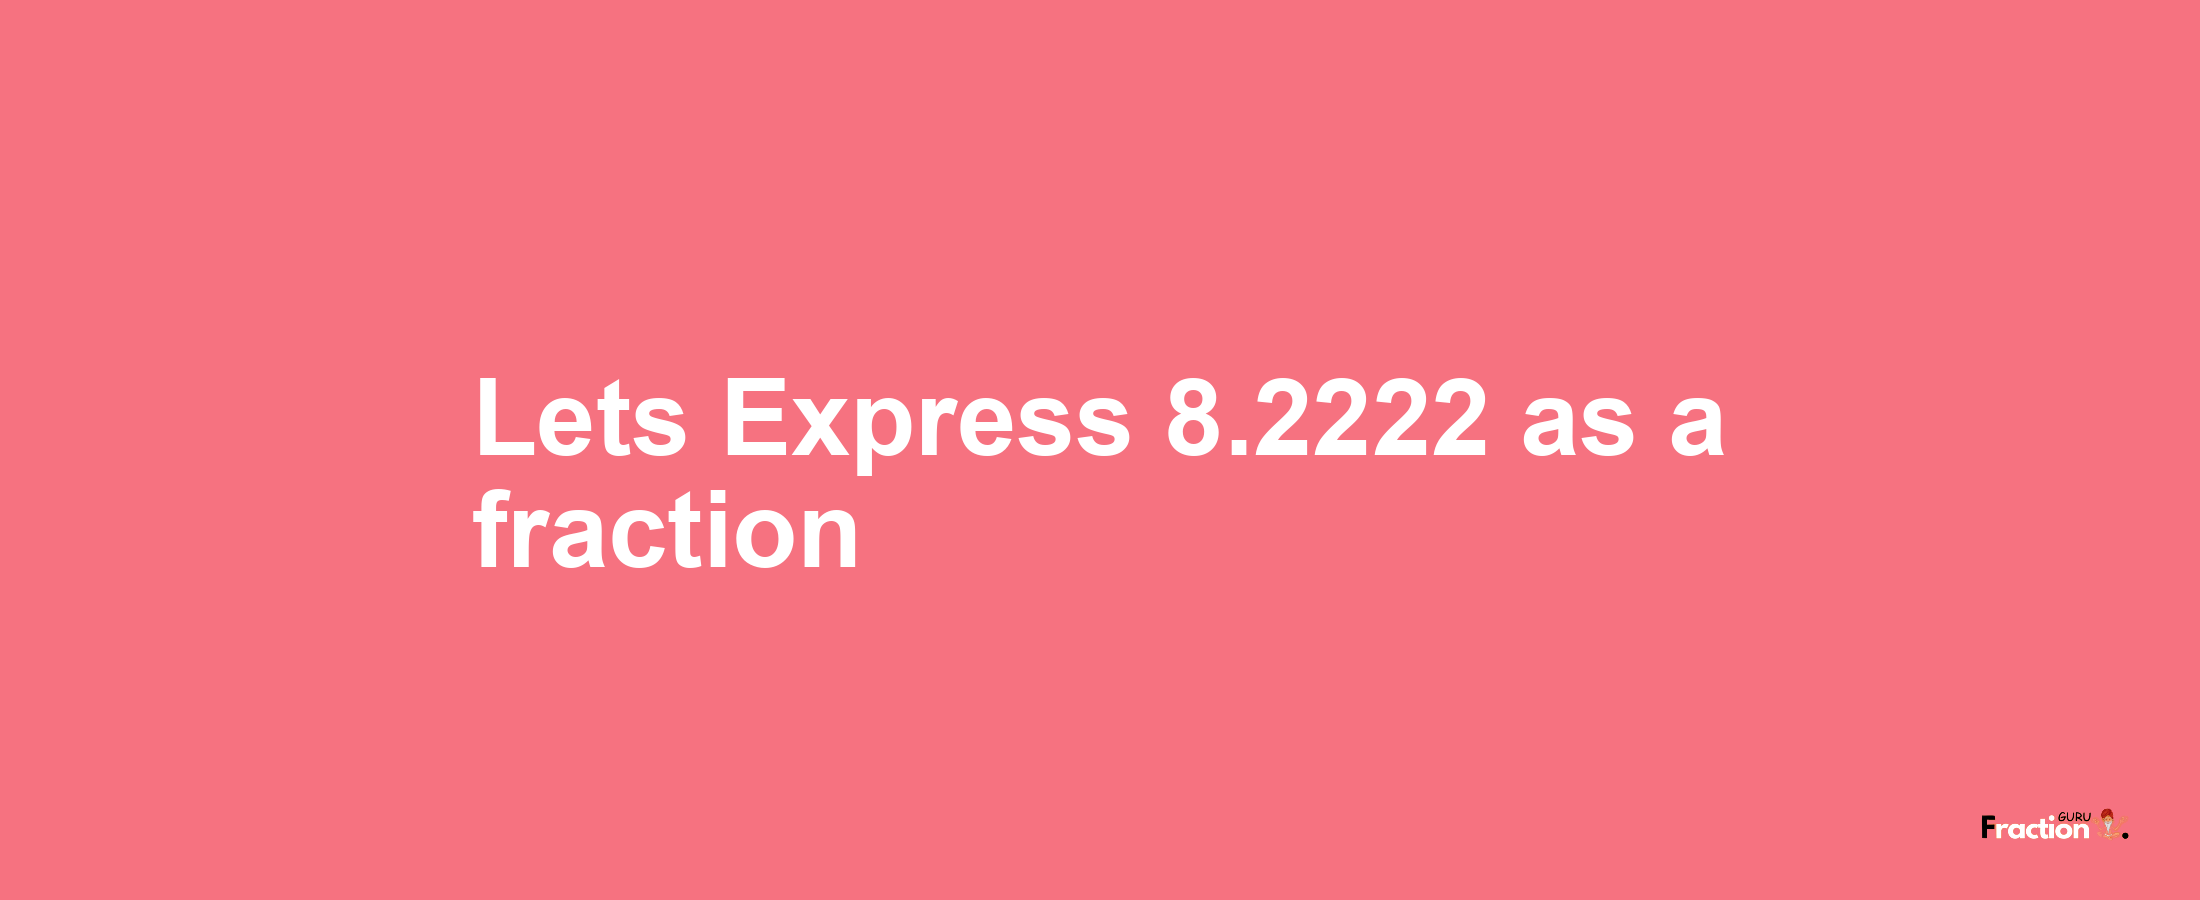 Lets Express 8.2222 as afraction